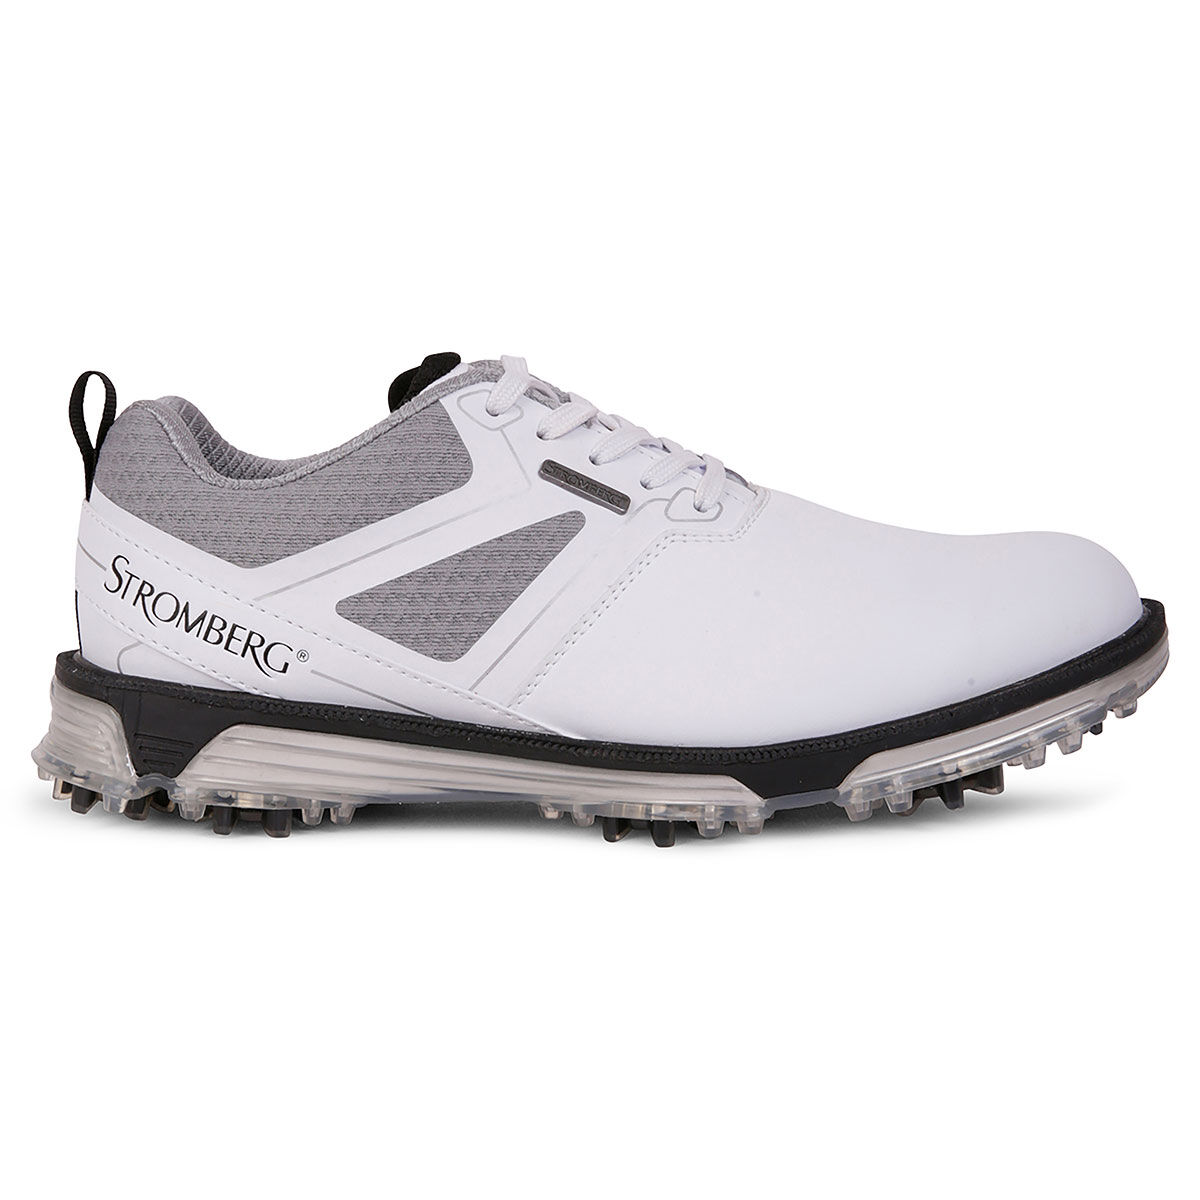 Stromberg Men's Tour Classic Waterproof Spiked Golf Shoes, Mens, White, 7 | American Golf von Stromberg